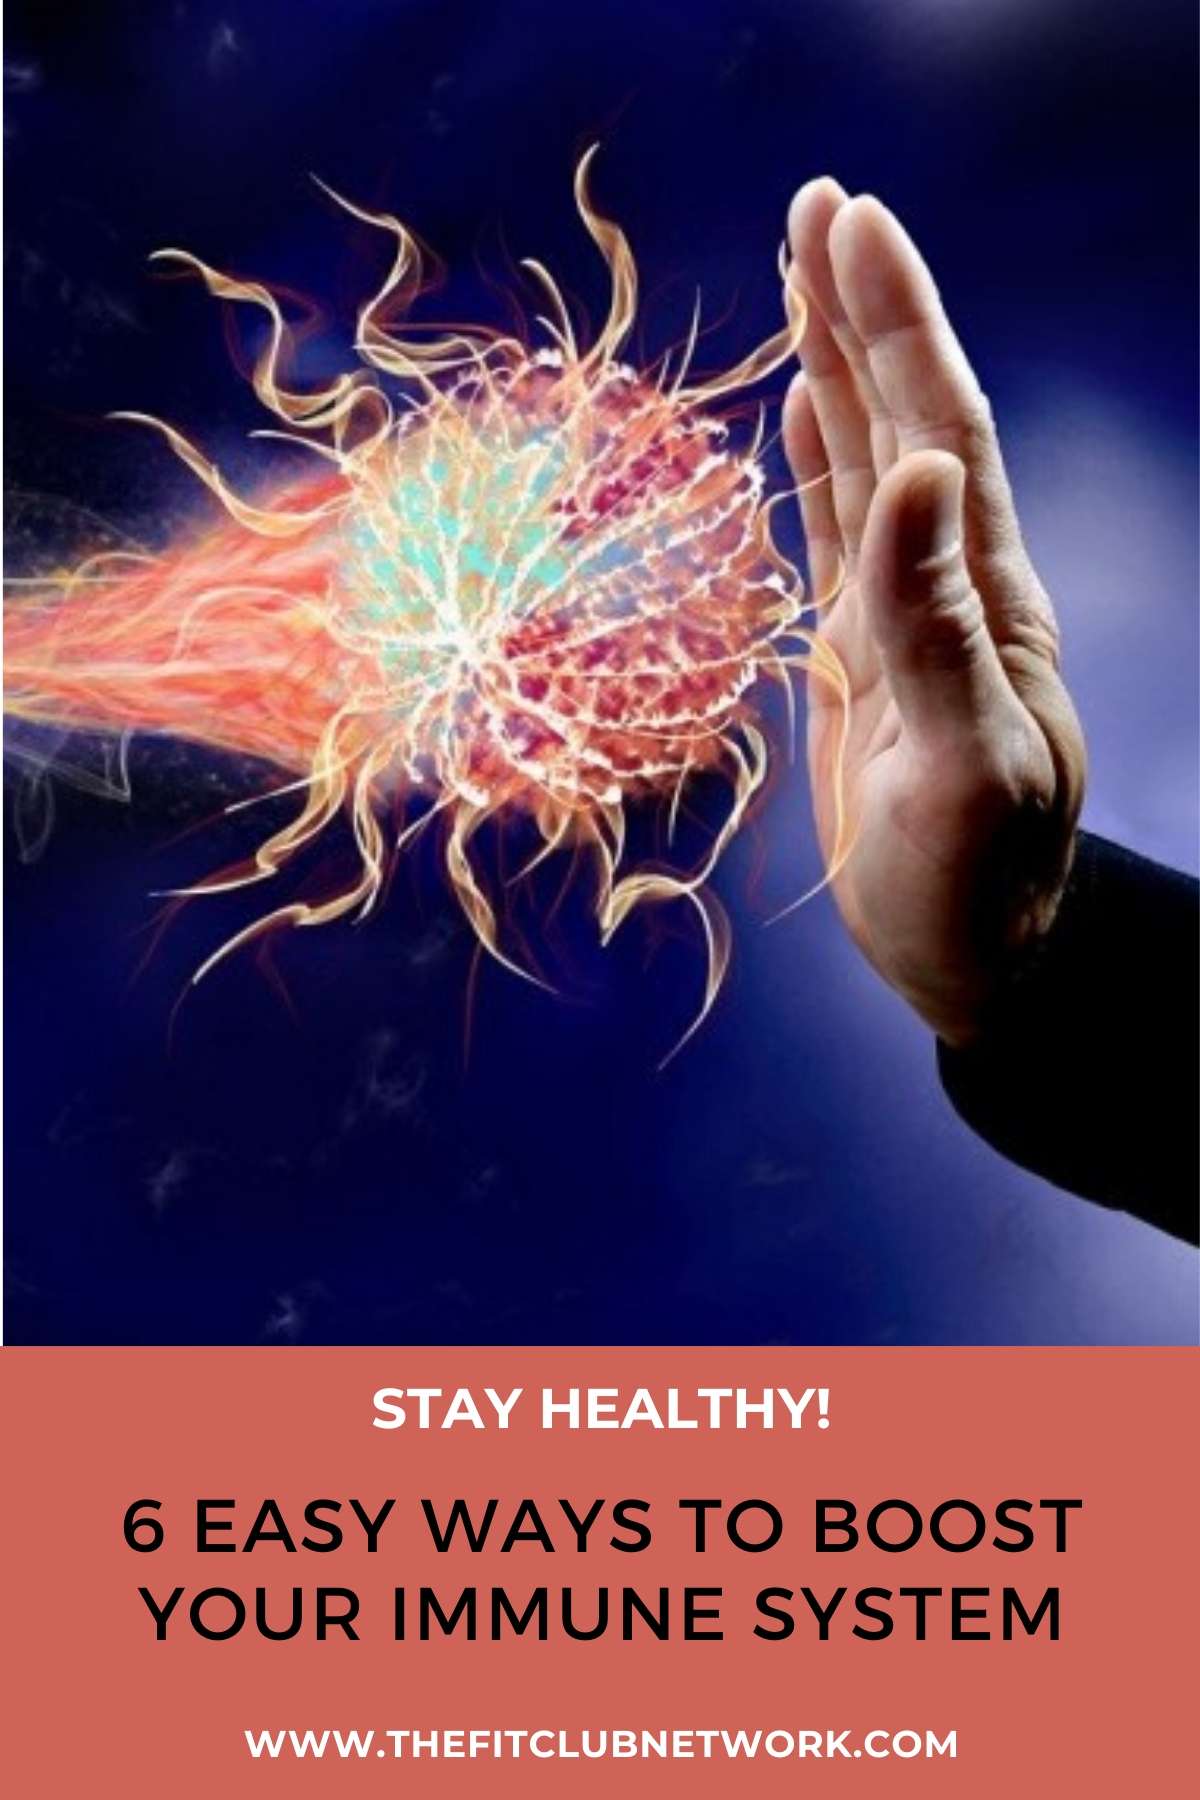 6 Ways to Boost Your Immune System | THEFITCLUBNETWORK.COM